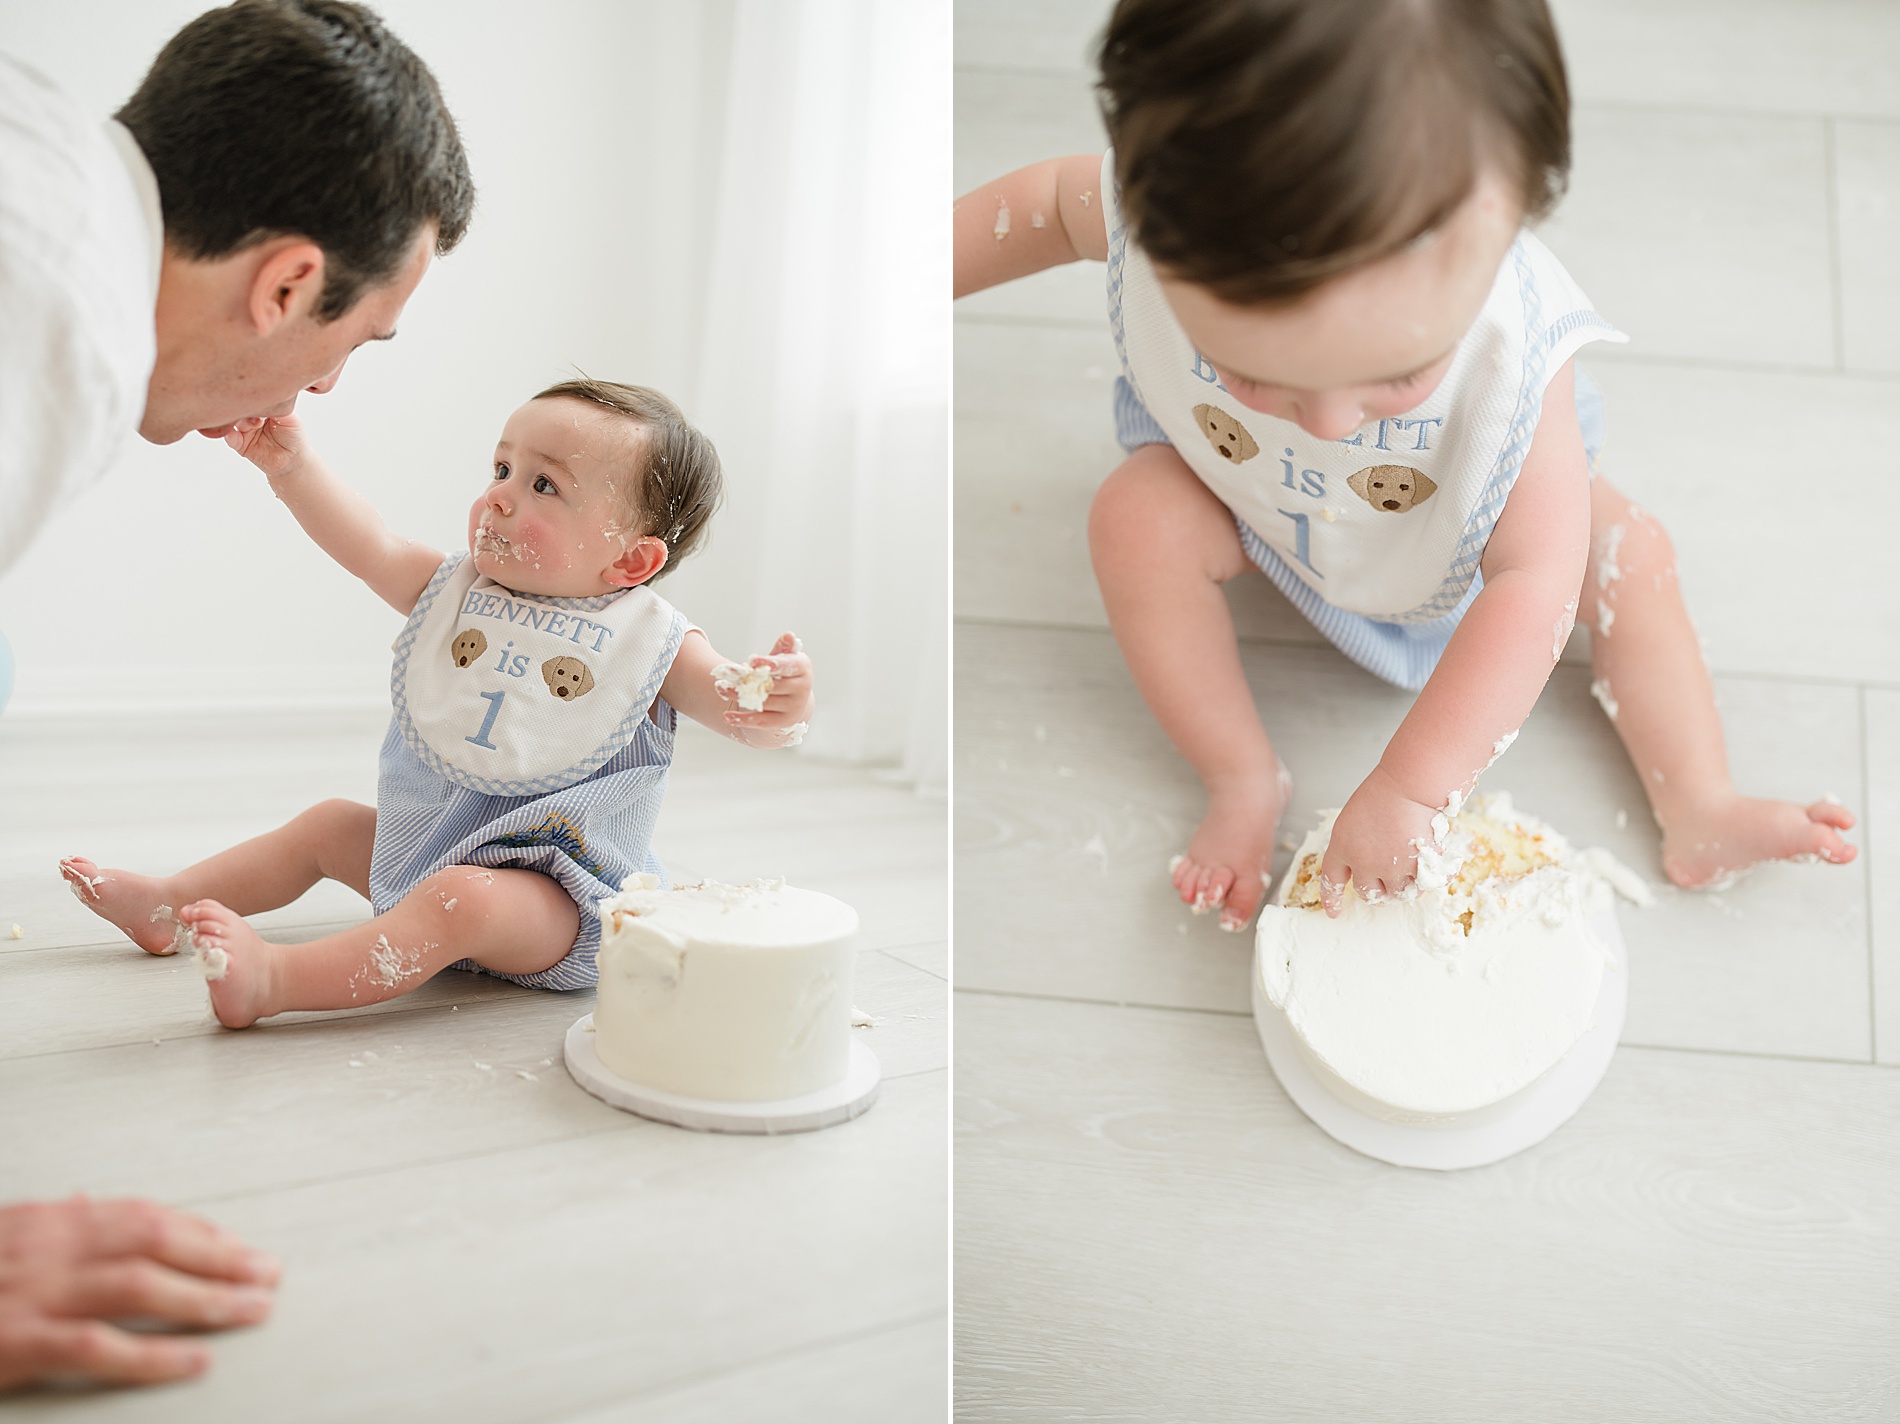 little boy tries to feed dad xake photographed by Lindsey Dutton Photography, a Dallas newborn photographer
